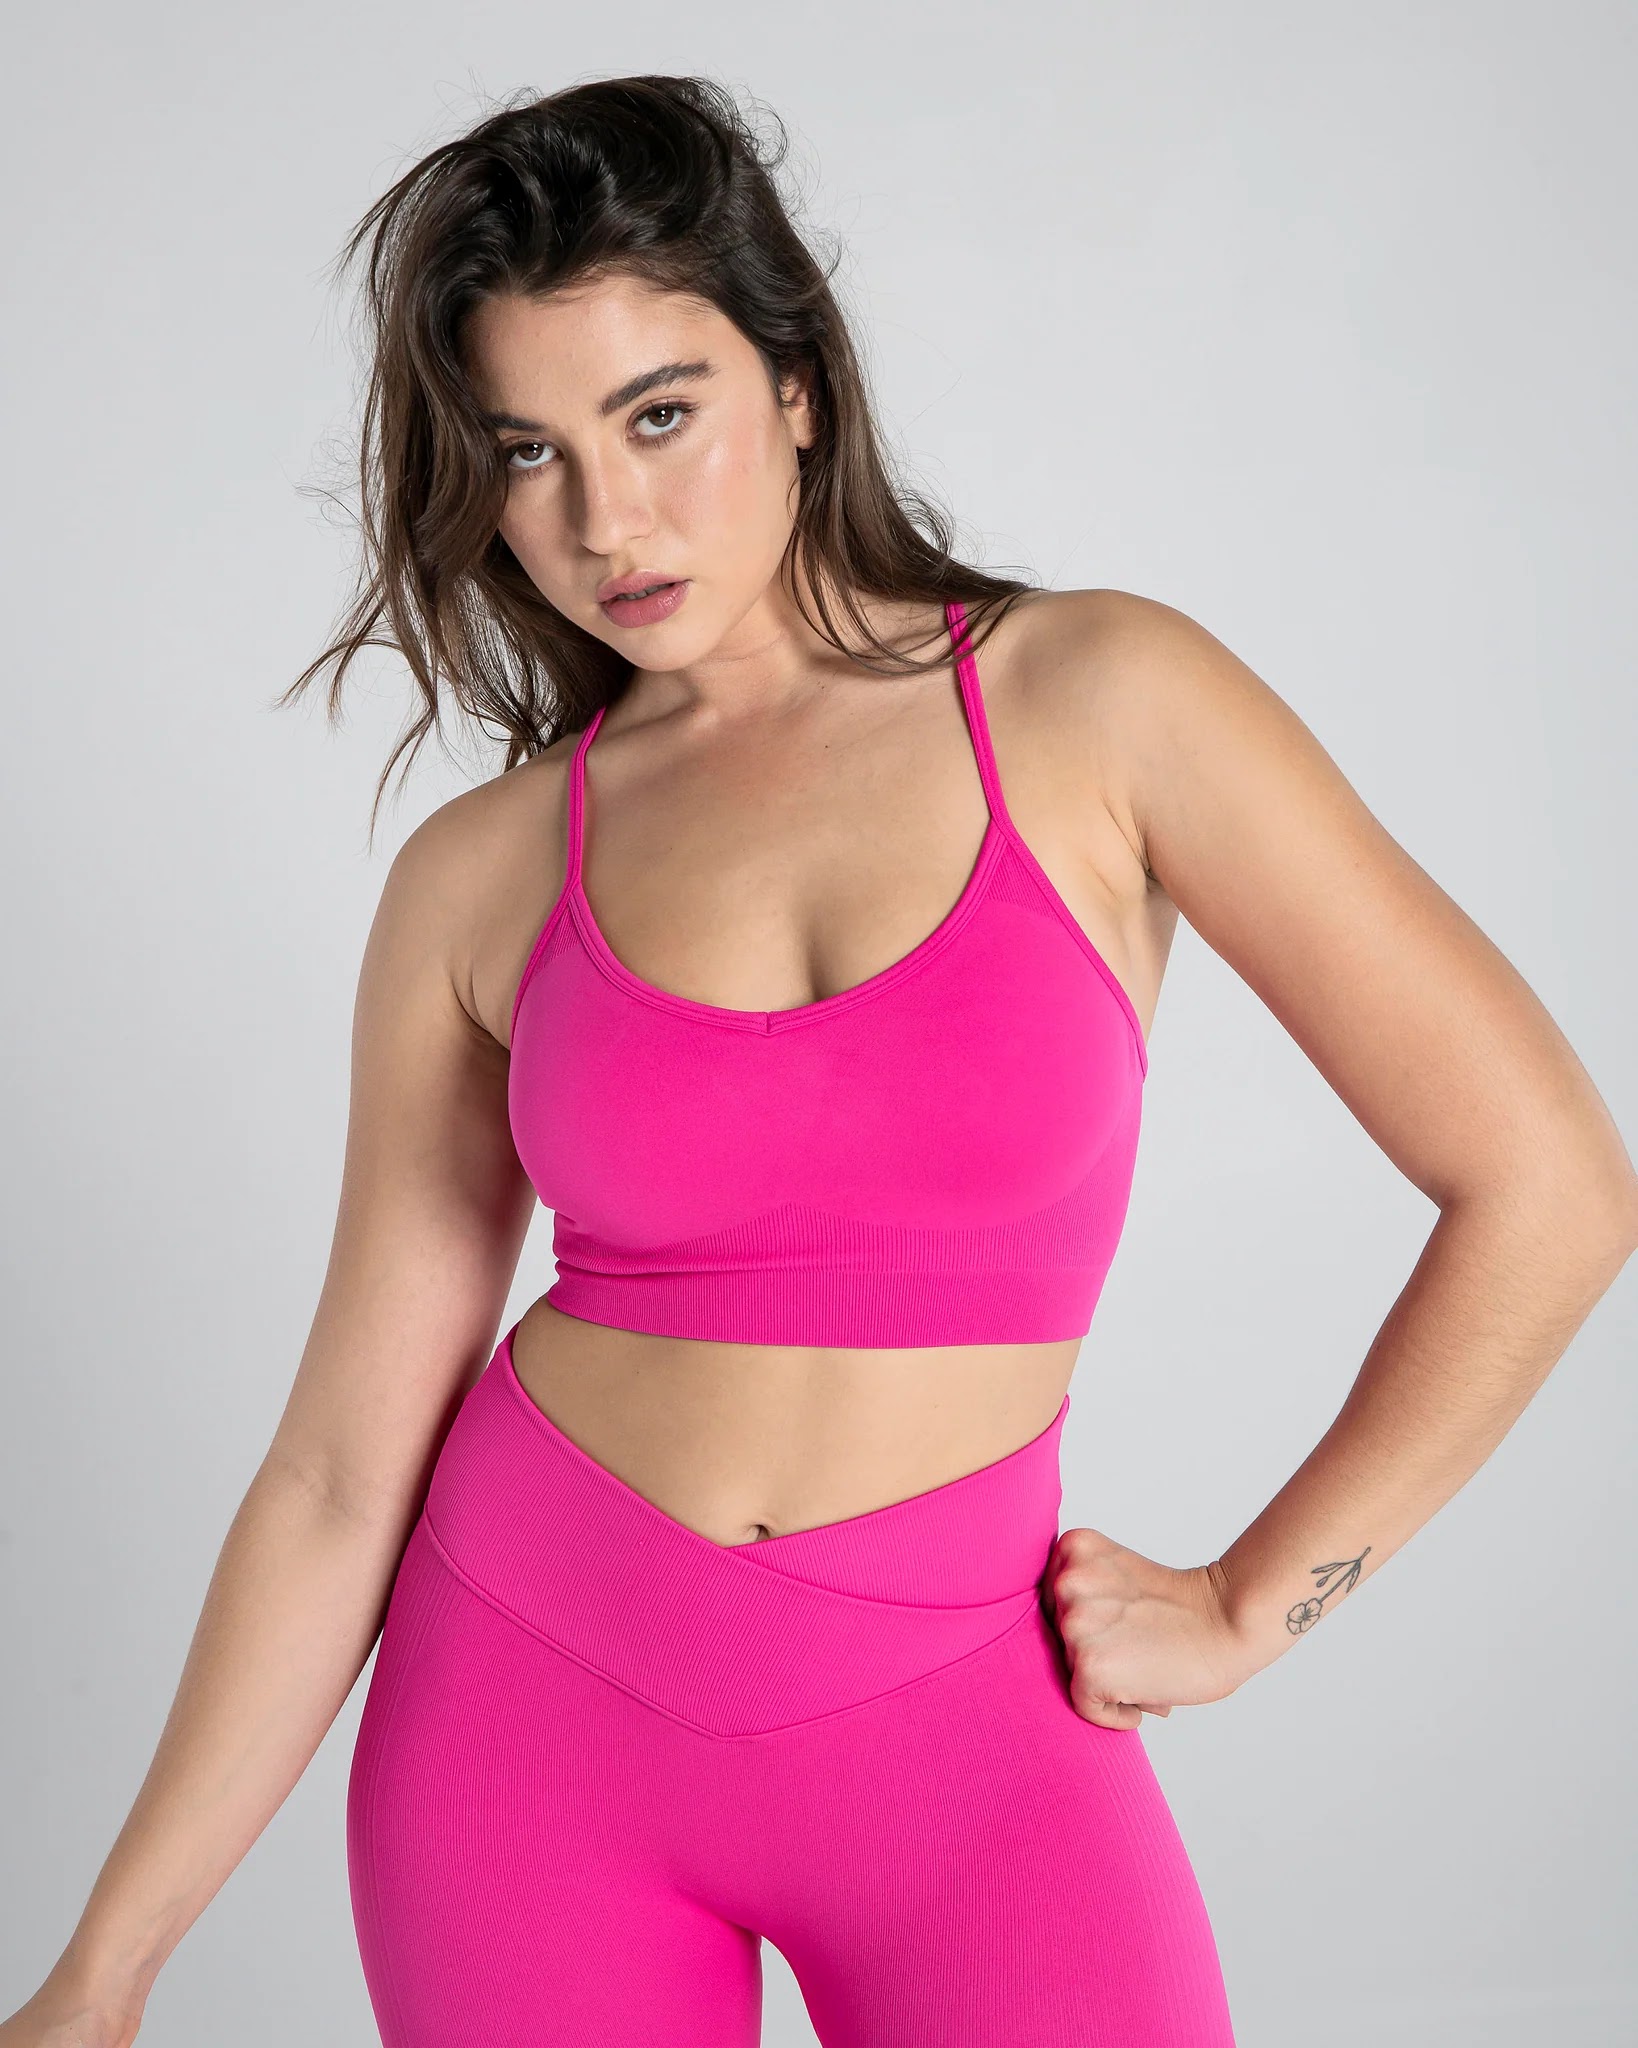 Are you in search for the perfect activewear set ? COSMOLLE has